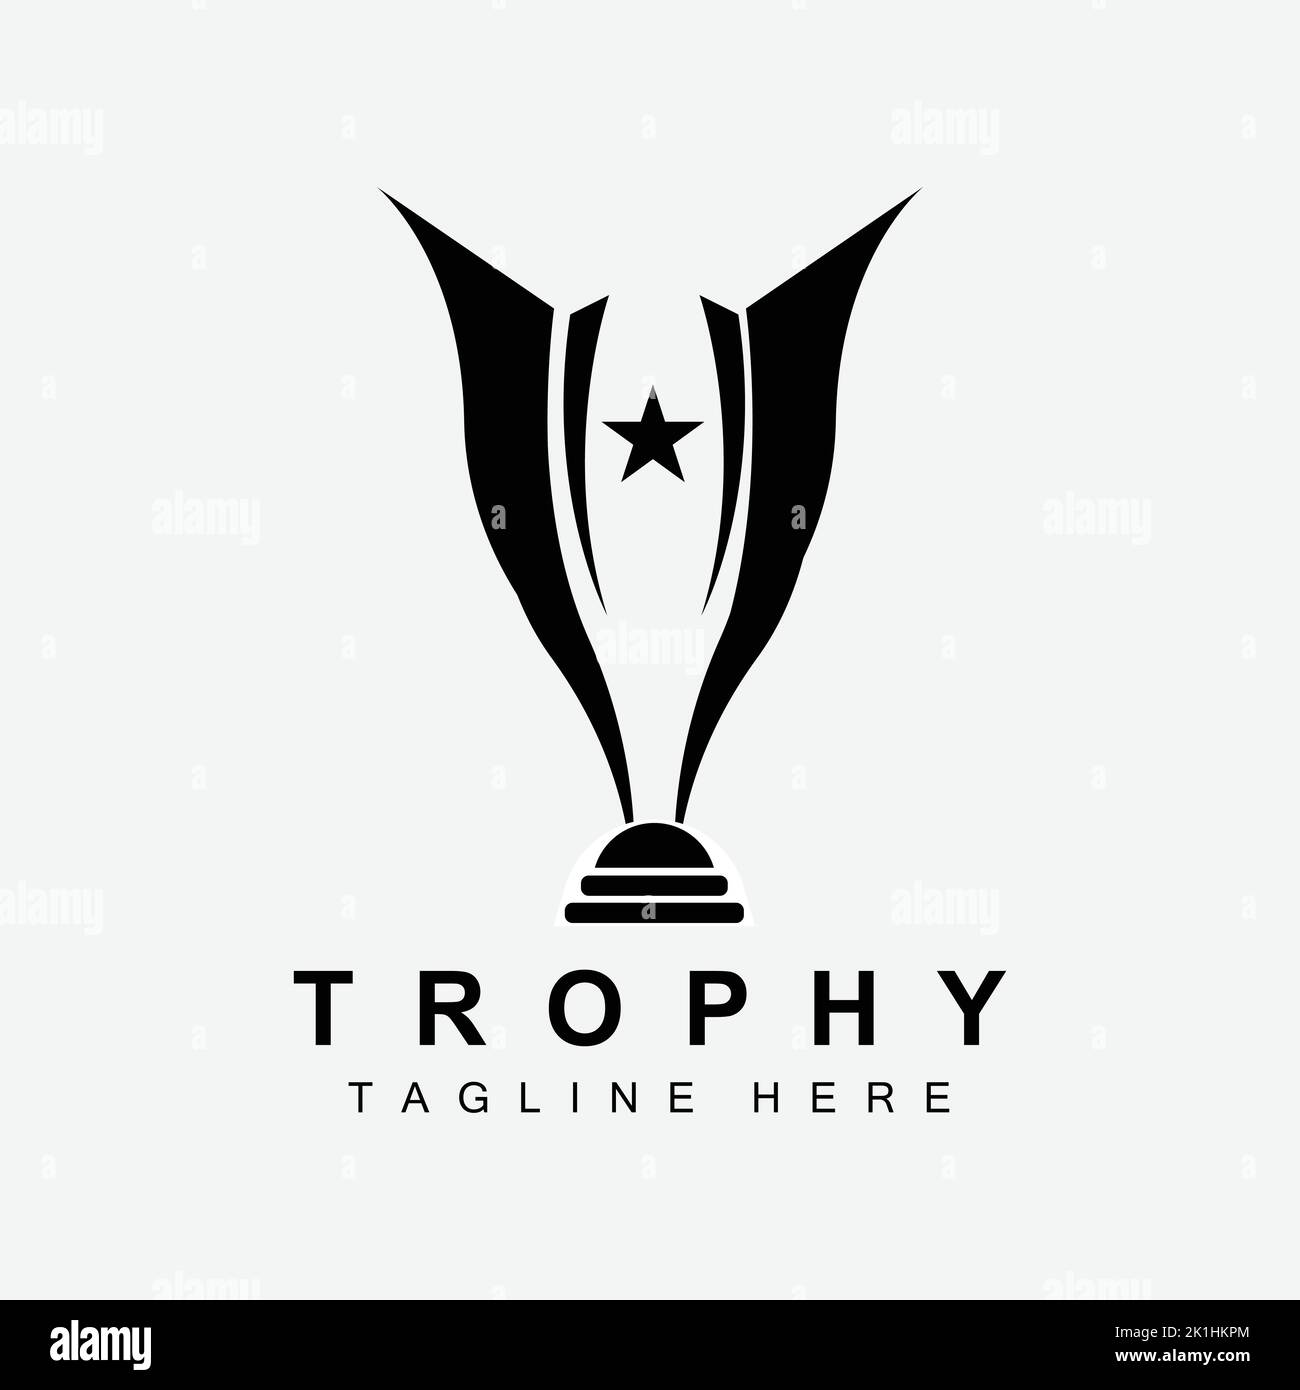 Champions league logo Black and White Stock Photos & Images - Alamy